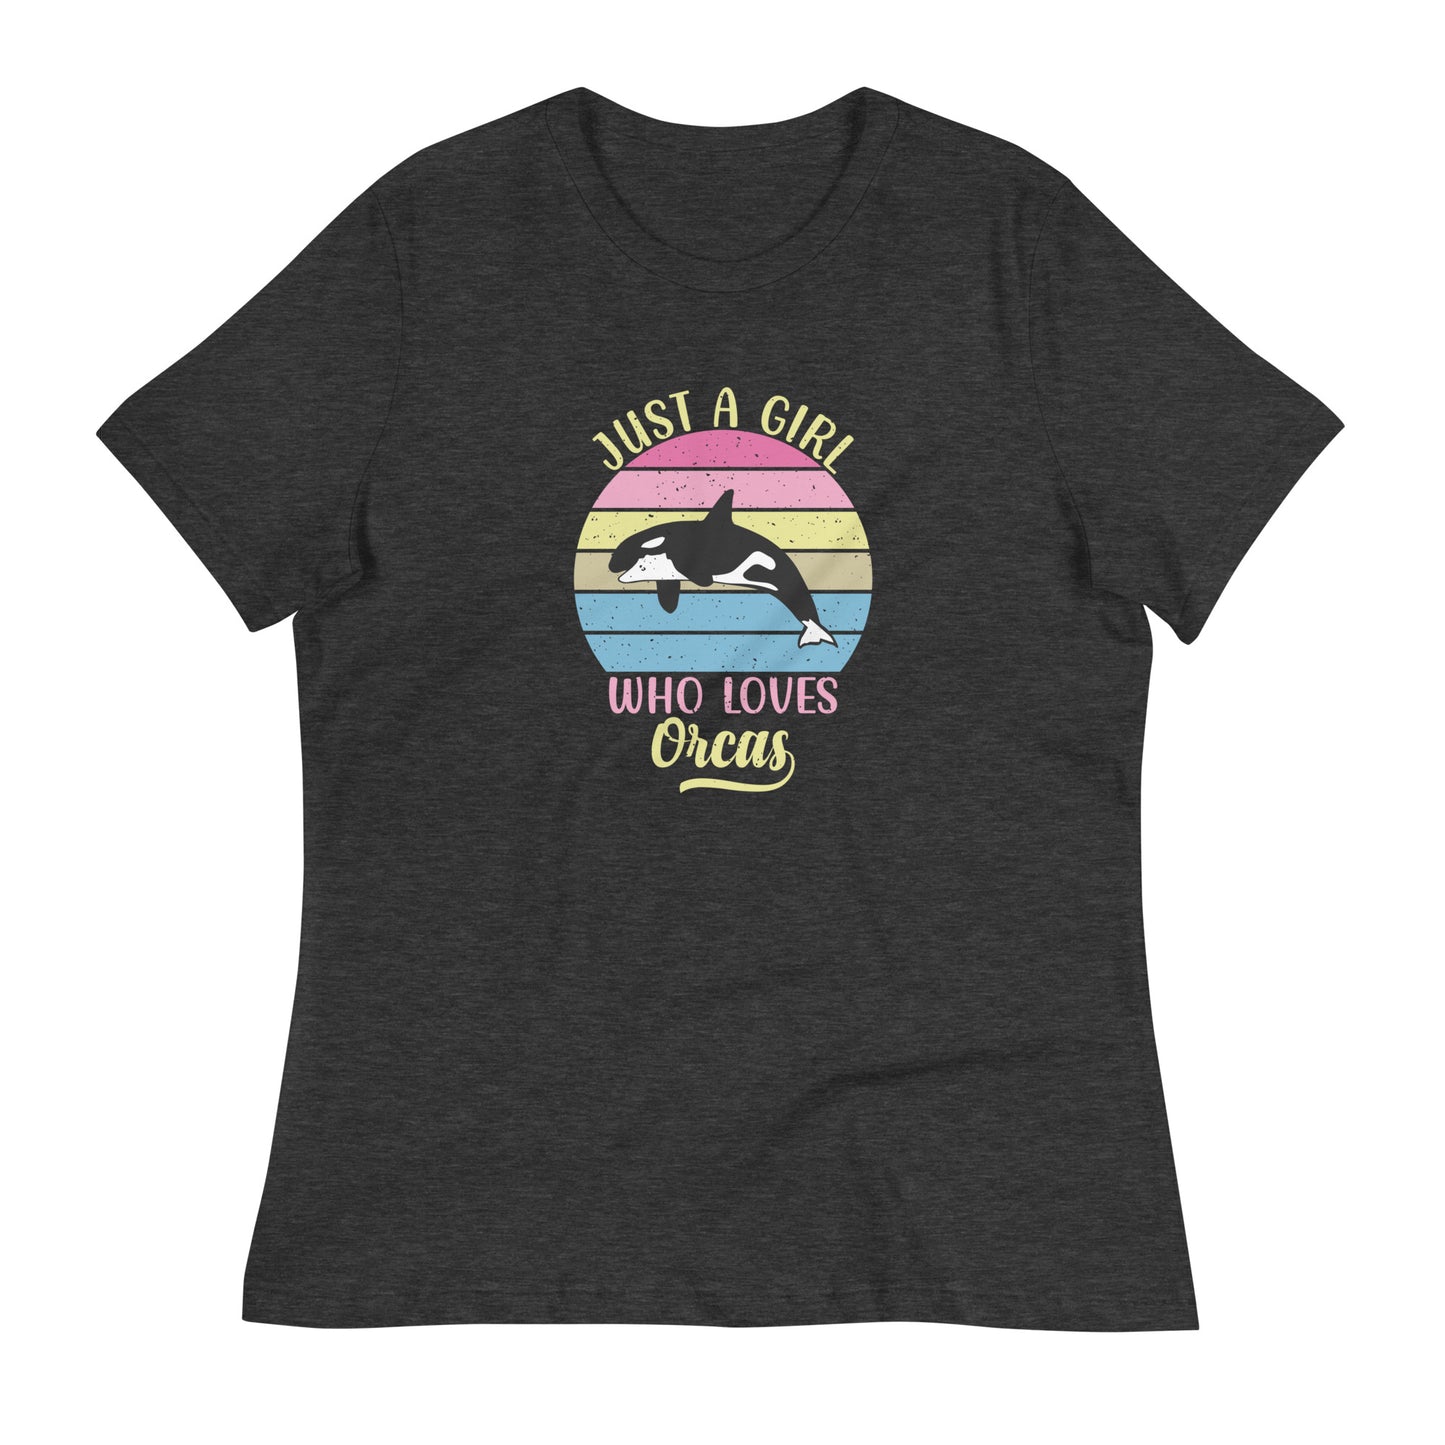 Just A Girl Who Loves Orcas Women's Relaxed T-Shirt, Whale Lover Shirt, Orca T-shirt